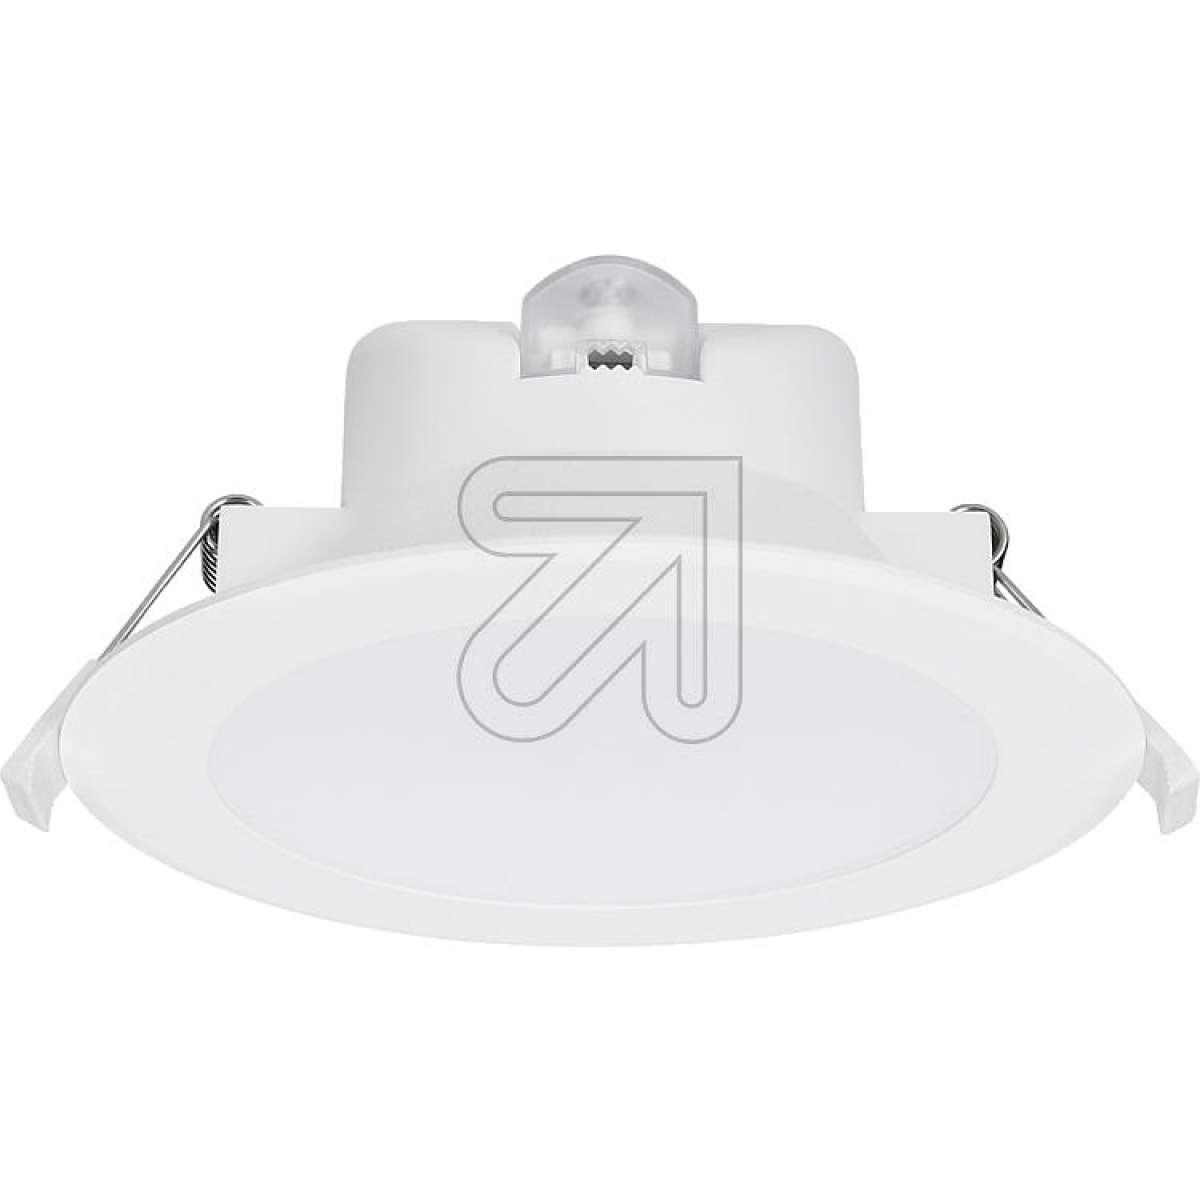 EVNLED recessed light white 14W 4000K L120 01 40Article-No: 669440